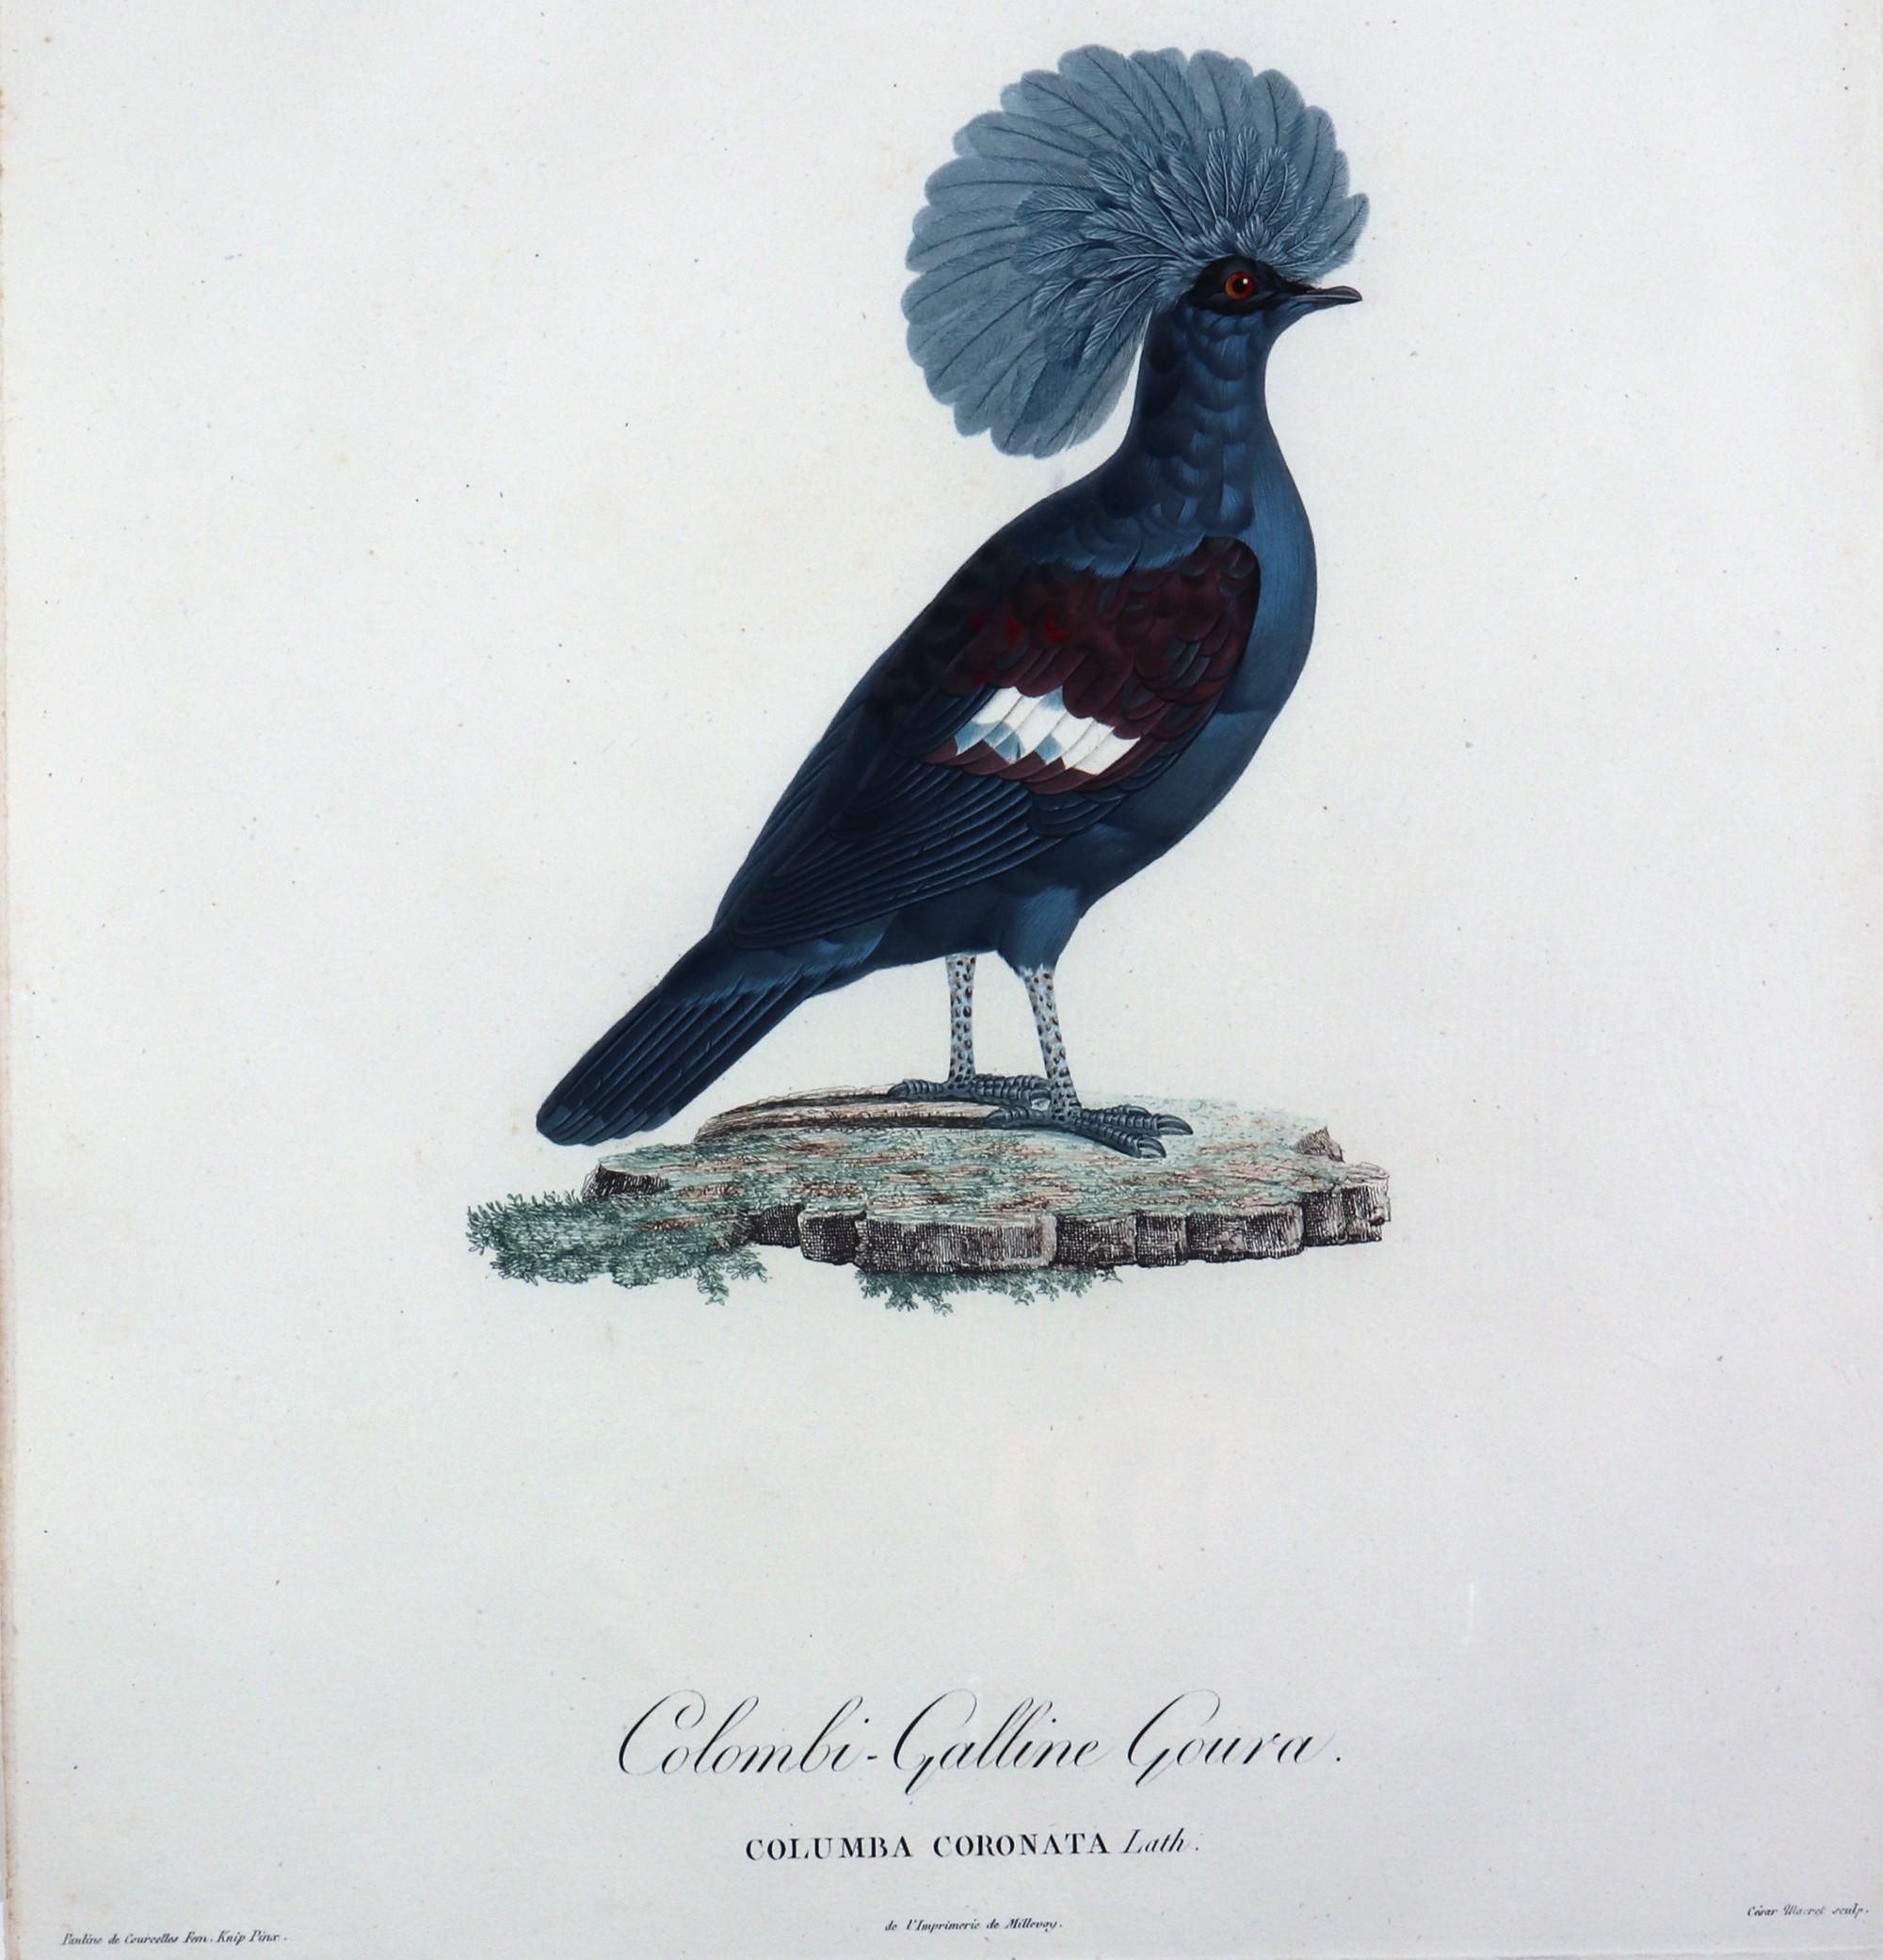 Regency Madame Pauline Knipp Engraving of A Bird, Colombi-Galline Goura For Sale